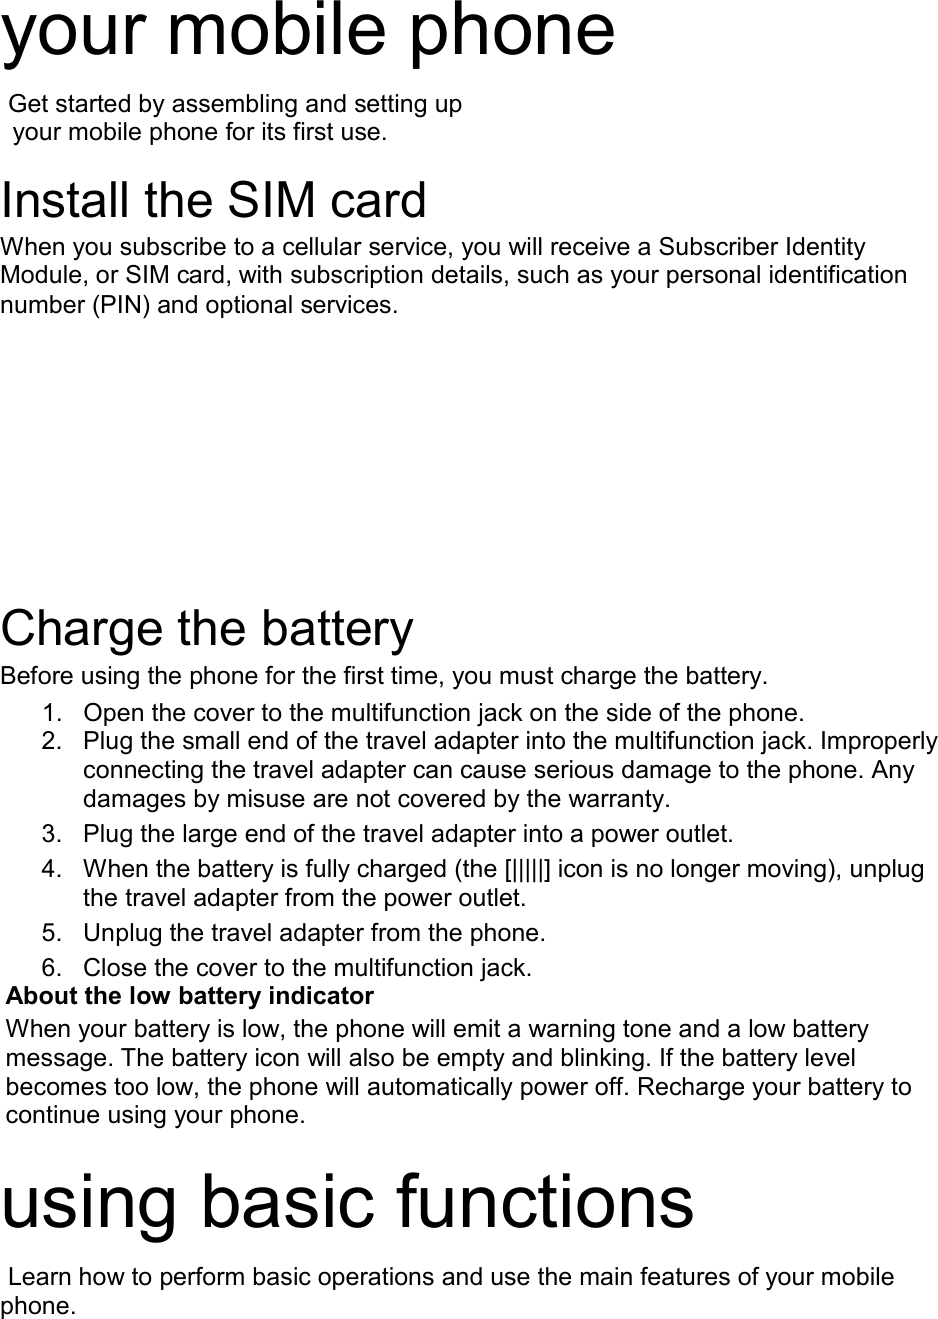 your mobile phone    Get started by assembling and setting up    your mobile phone for its first use.  Install the SIM card When you subscribe to a cellular service, you will receive a Subscriber Identity Module, or SIM card, with subscription details, such as your personal identification number (PIN) and optional services.  Charge the battery Before using the phone for the first time, you must charge the battery. 1. Open the cover to the multifunction jack on the side of the phone. 2. Plug the small end of the travel adapter into the multifunction jack. Improperly connecting the travel adapter can cause serious damage to the phone. Any damages by misuse are not covered by the warranty. 3. Plug the large end of the travel adapter into a power outlet. 4. When the battery is fully charged (the [|||||] icon is no longer moving), unplug the travel adapter from the power outlet. 5. Unplug the travel adapter from the phone. 6. Close the cover to the multifunction jack. About the low battery indicator When your battery is low, the phone will emit a warning tone and a low battery message. The battery icon will also be empty and blinking. If the battery level becomes too low, the phone will automatically power off. Recharge your battery to continue using your phone.  using basic functions  Learn how to perform basic operations and use the main features of your mobile phone.    